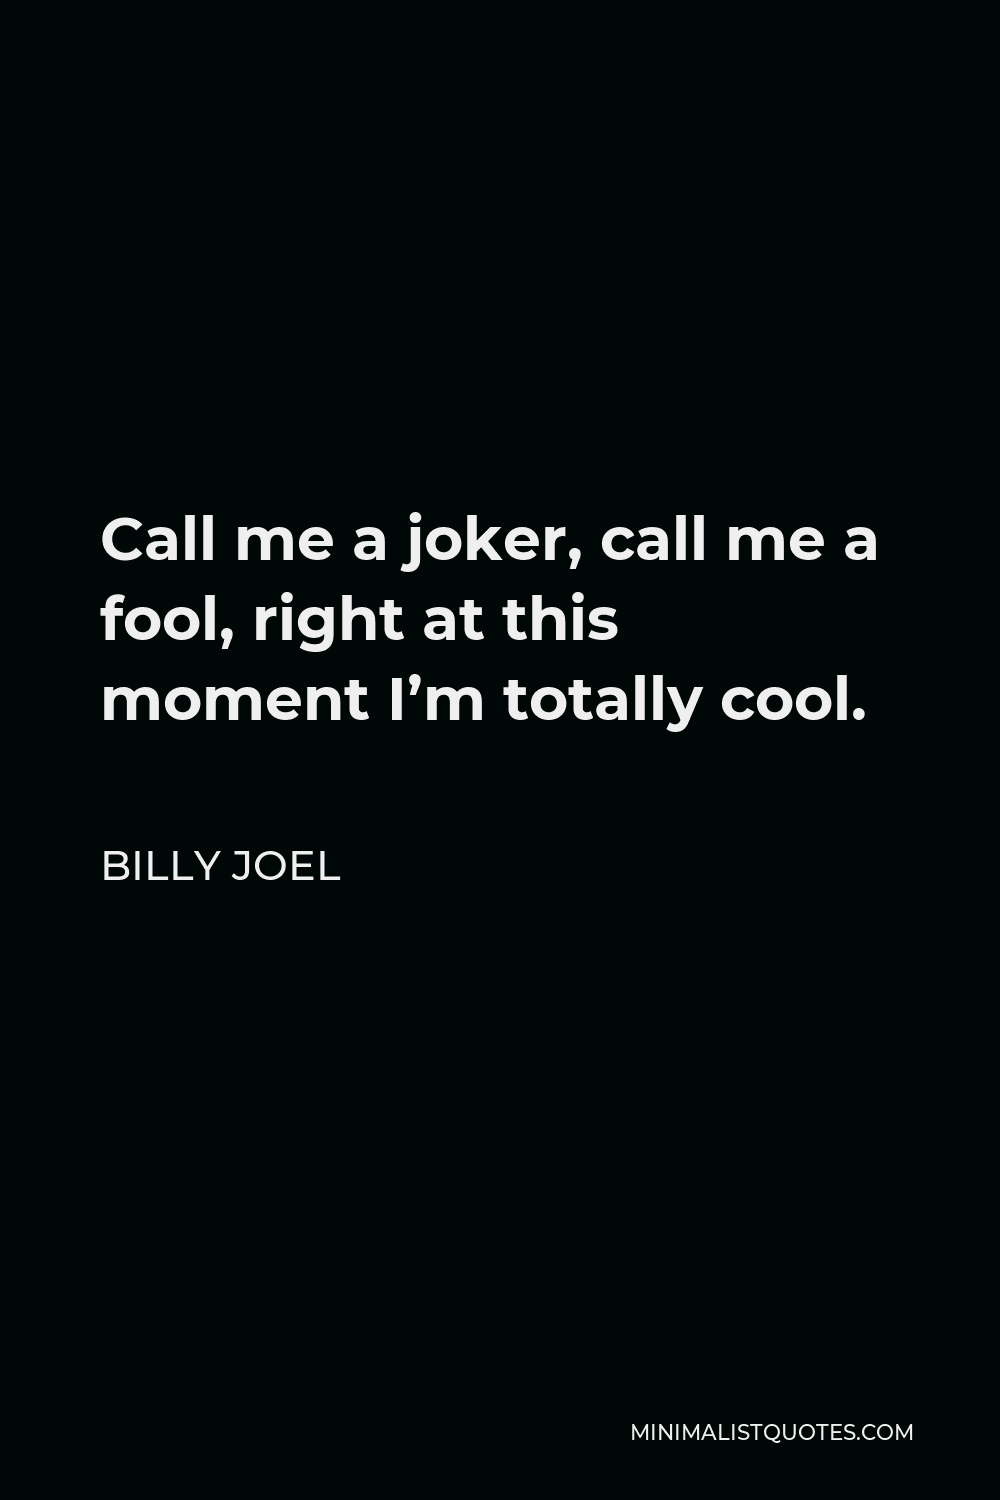 Billy Joel Quote - Call me a joker, call me a fool, right at this moment I’m totally cool.